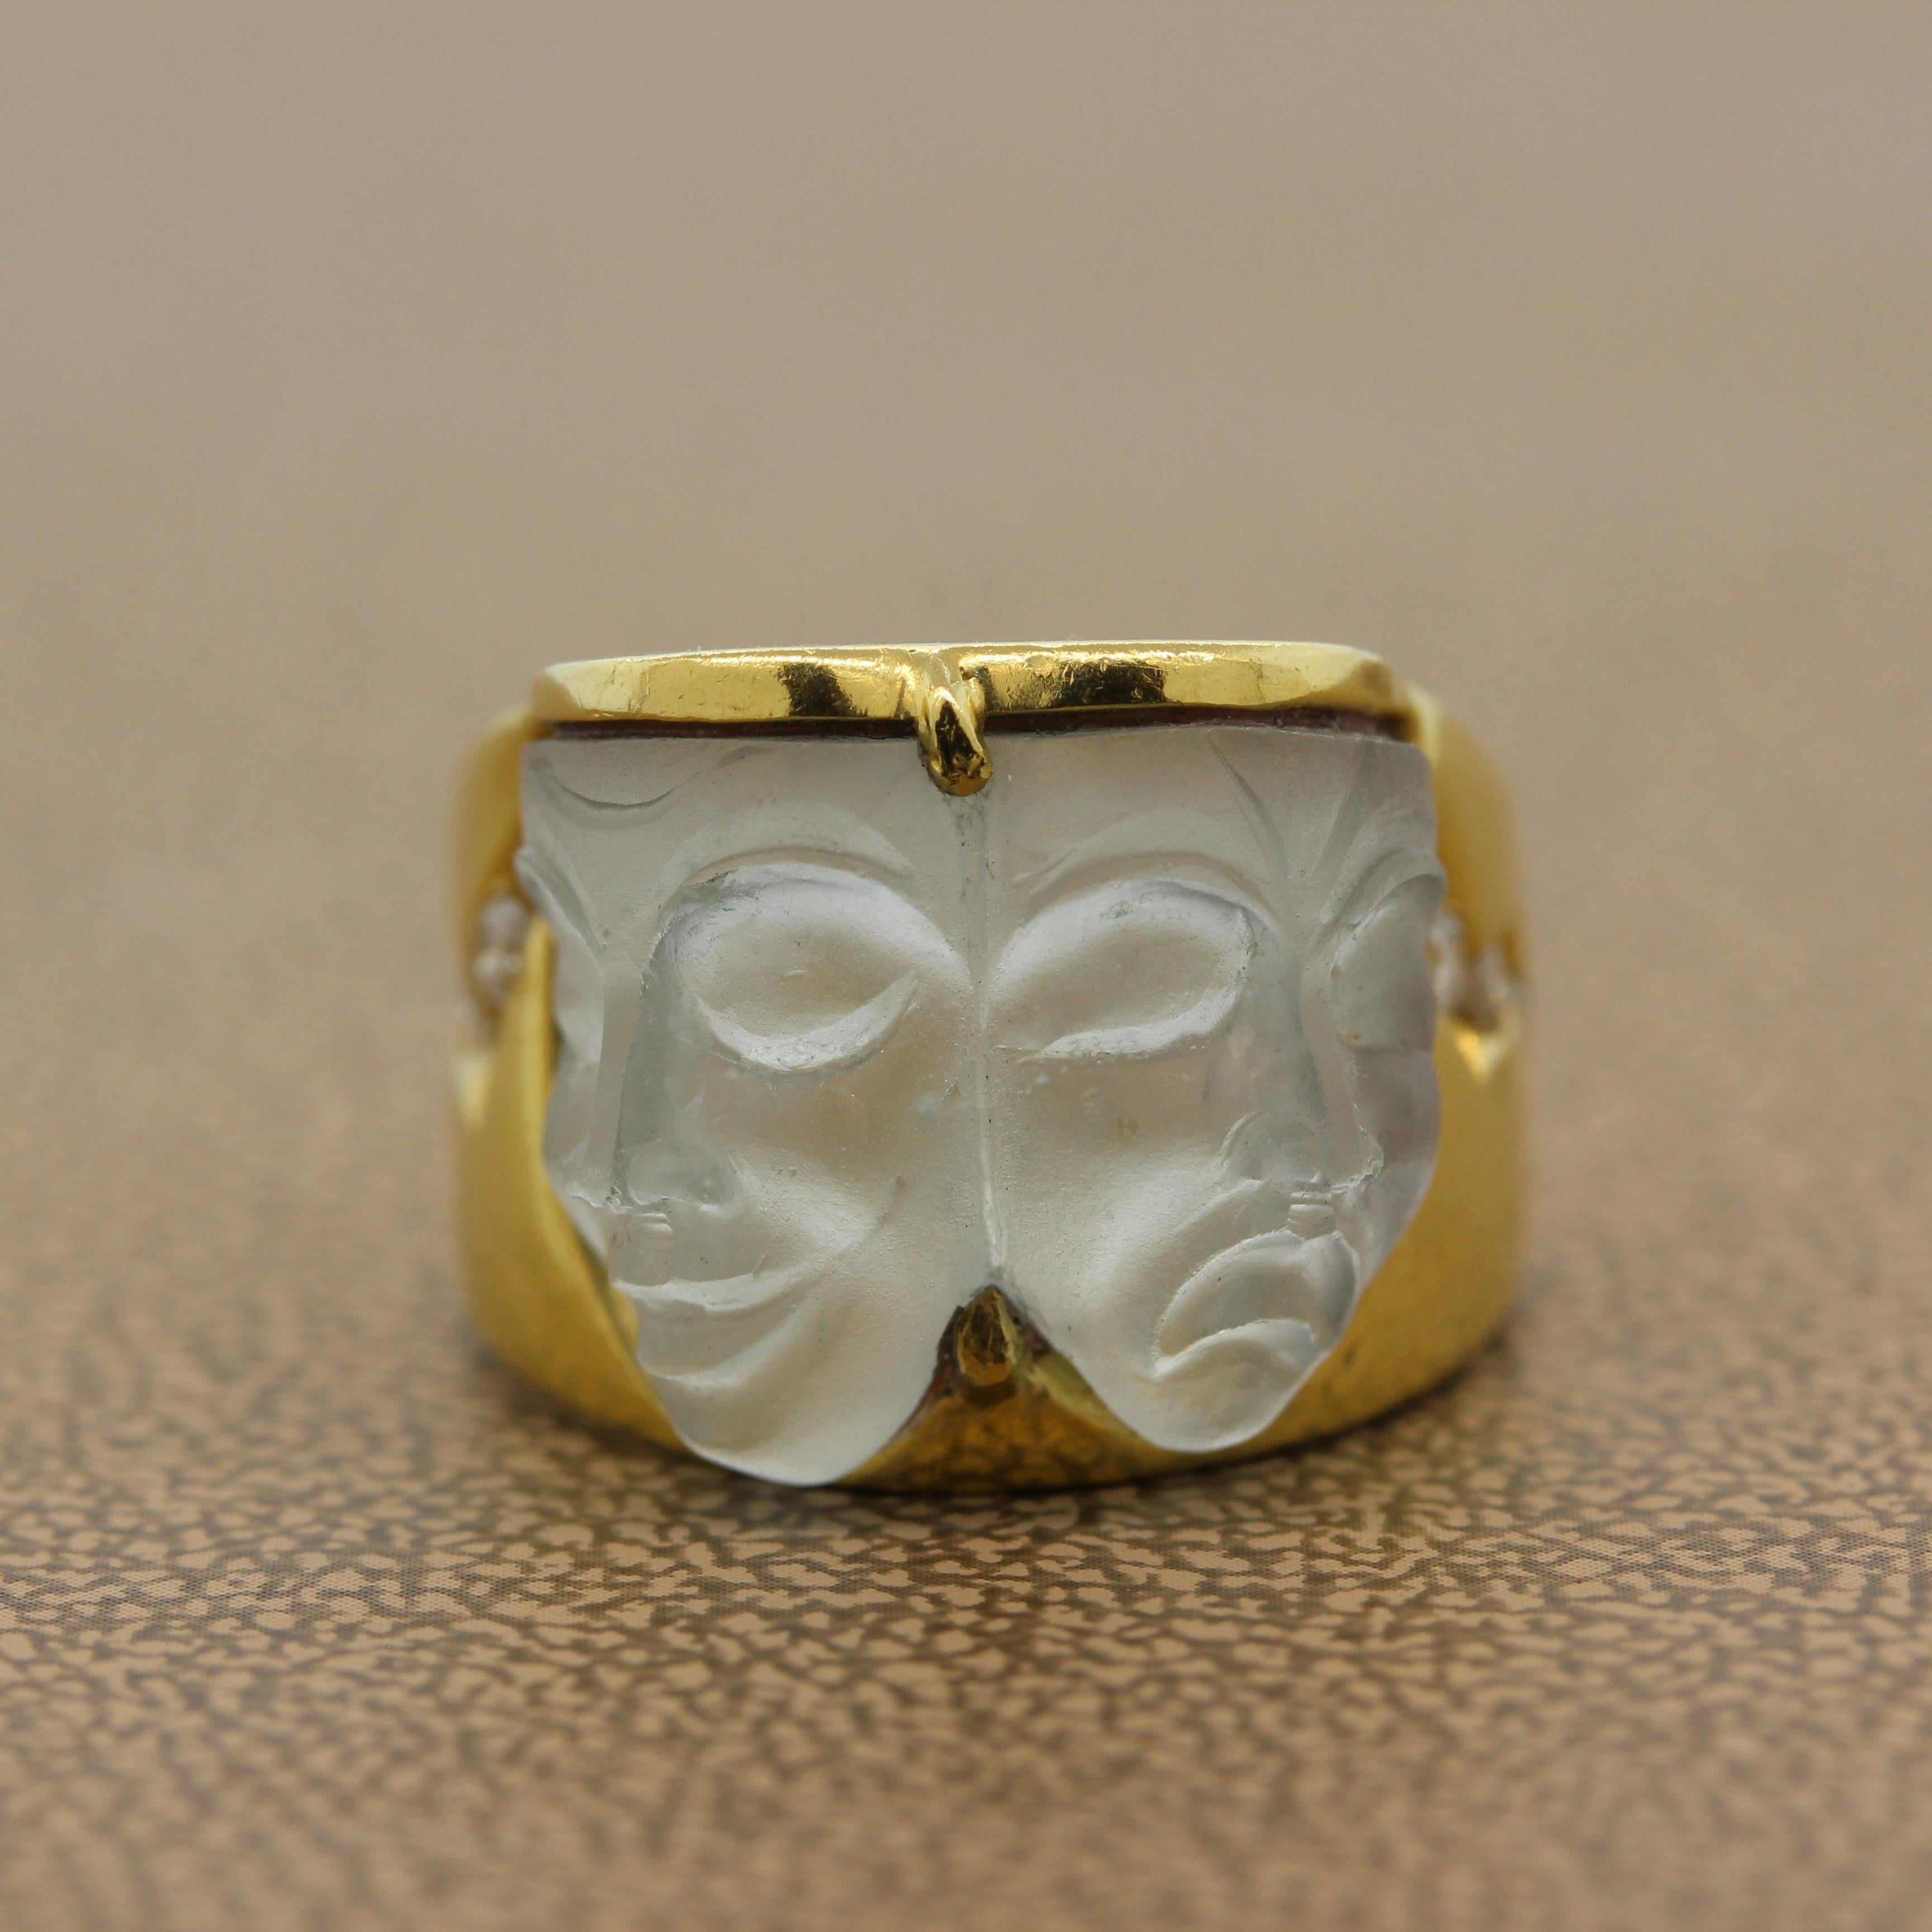 A ring full of character featuring the faces we wear. The two faces carved of aquamarine are of a happy face and a sad face. The masks are accented by round cut colorless diamonds set in 18K yellow gold.   

Ring Size 4.25 (Sizable)

